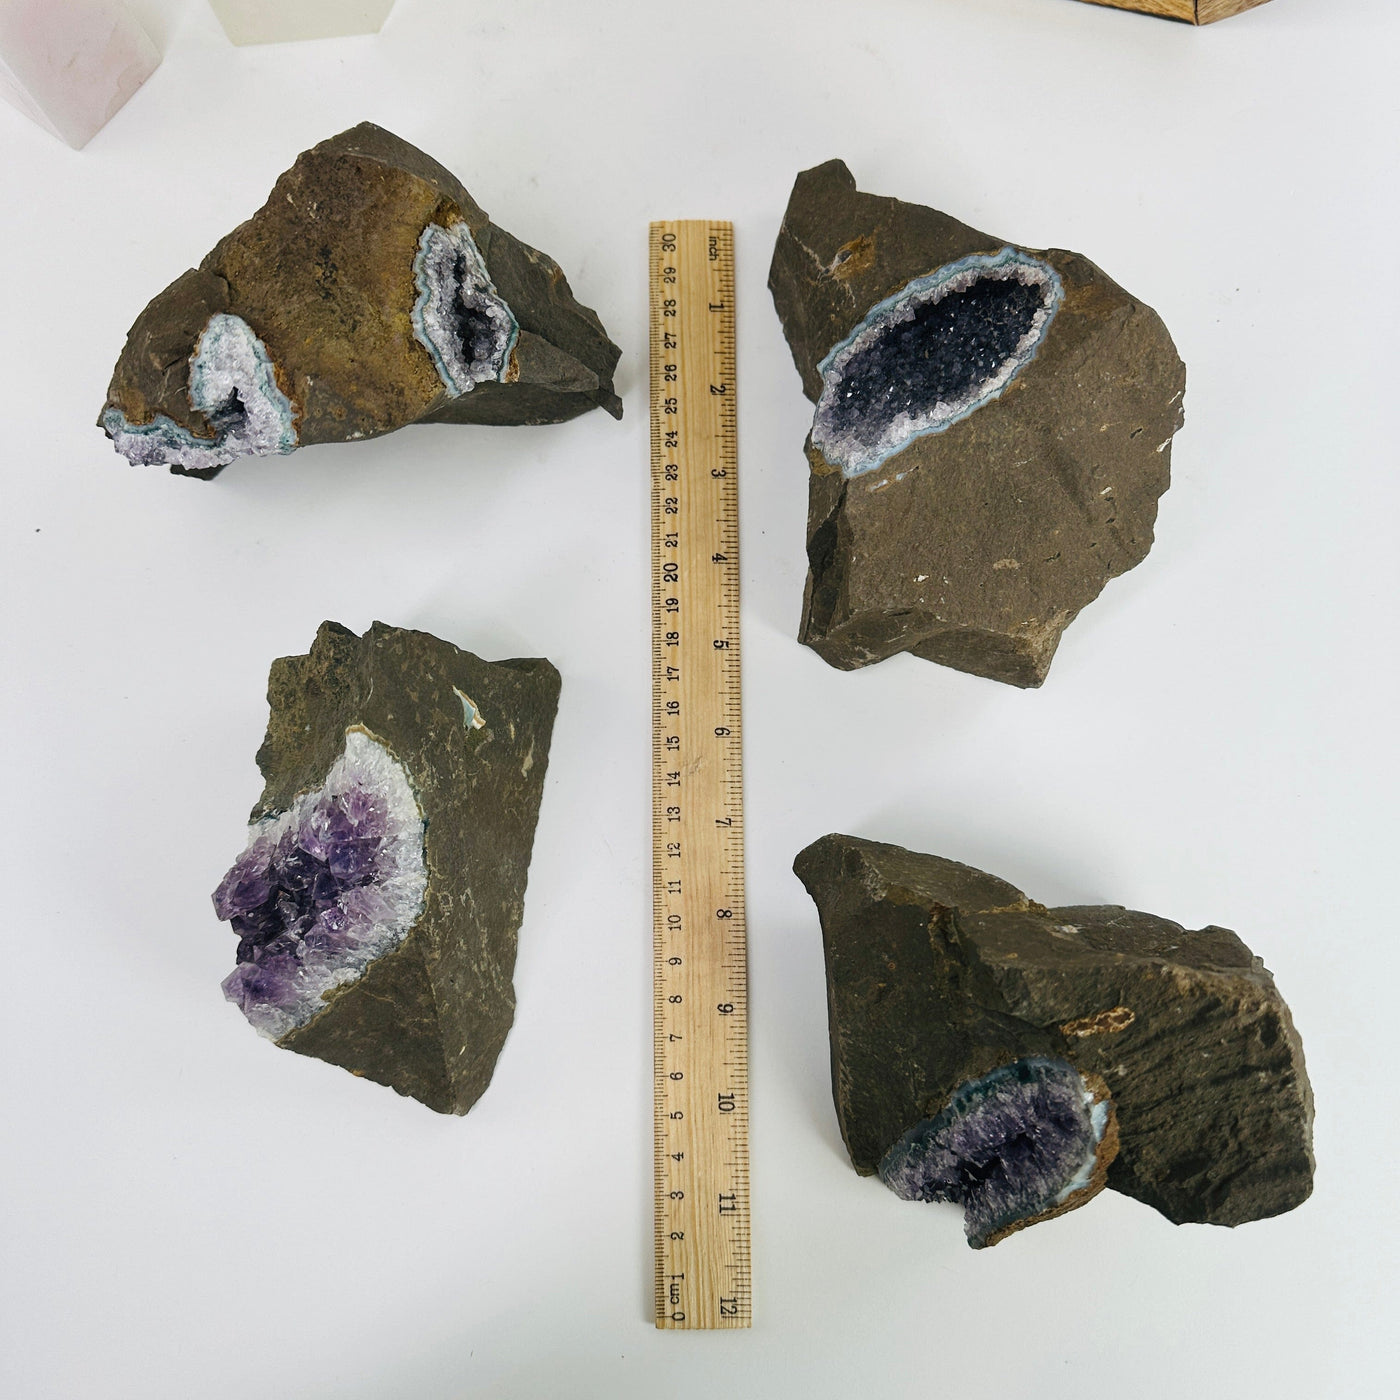 amethyst clusters next to a ruler for size reference